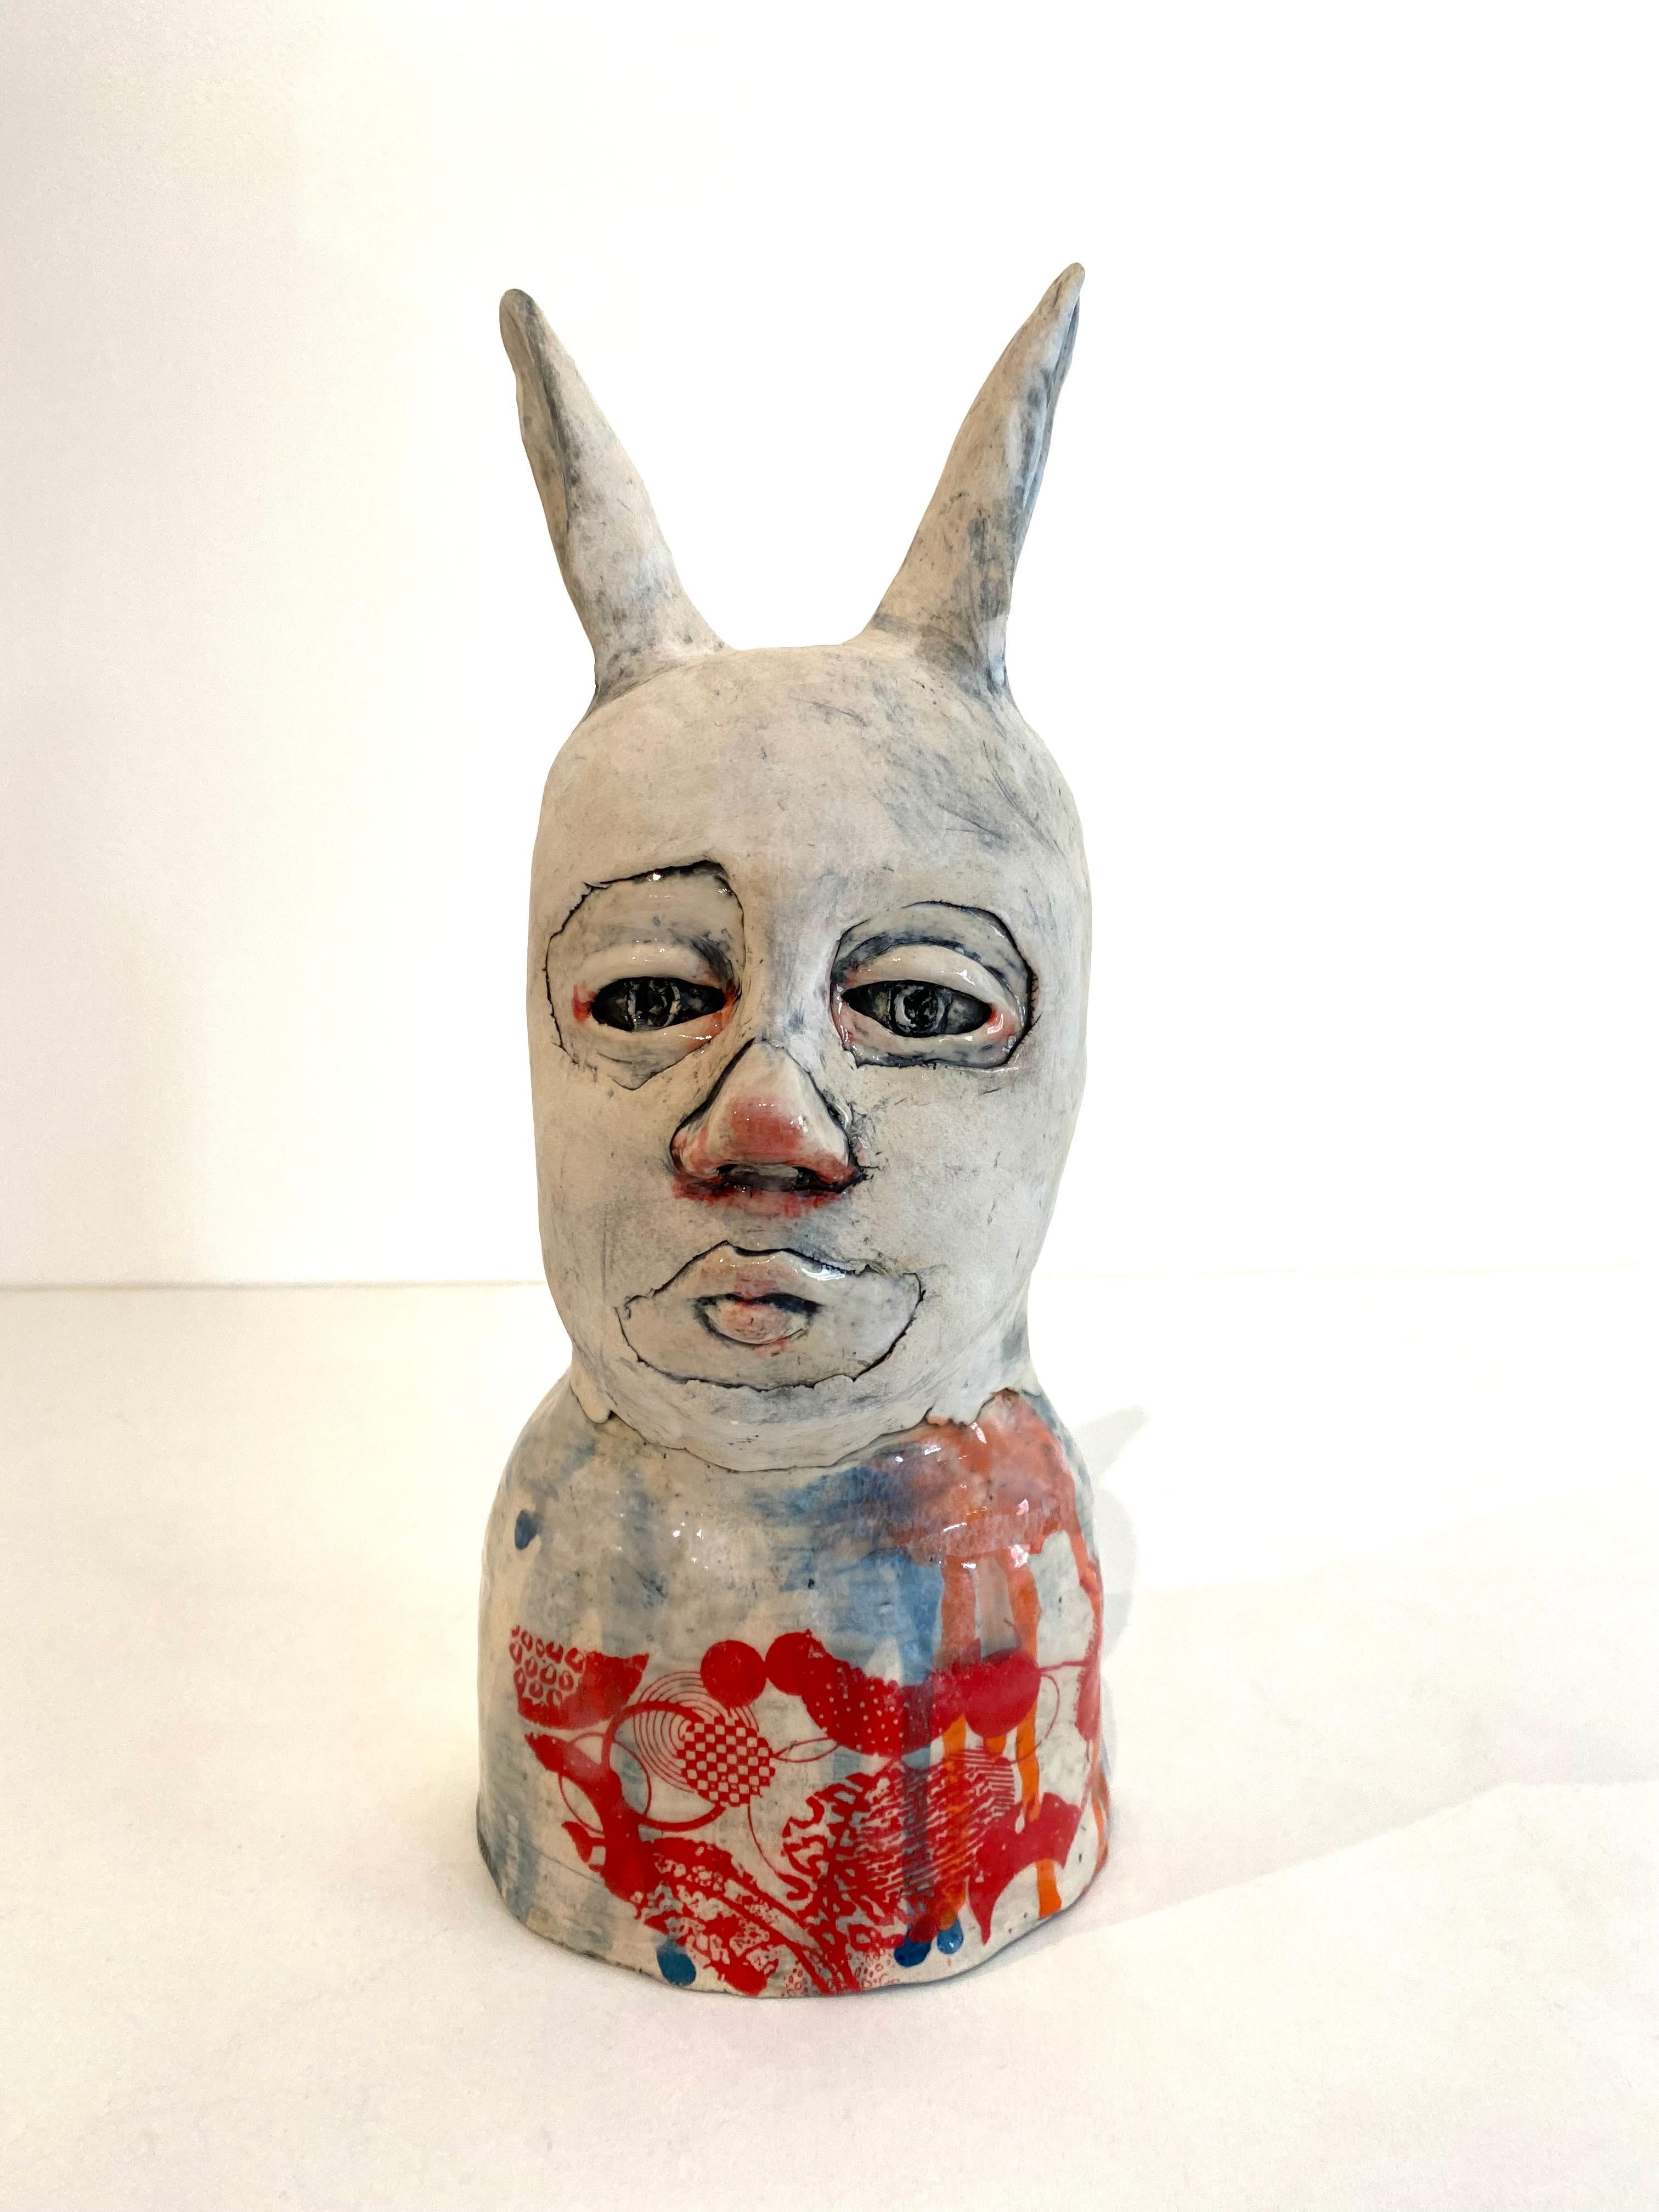 Ashley Benton Figurative Sculpture - Ceramic Bunny Person: 'He’s love and light and all things bright and dark'